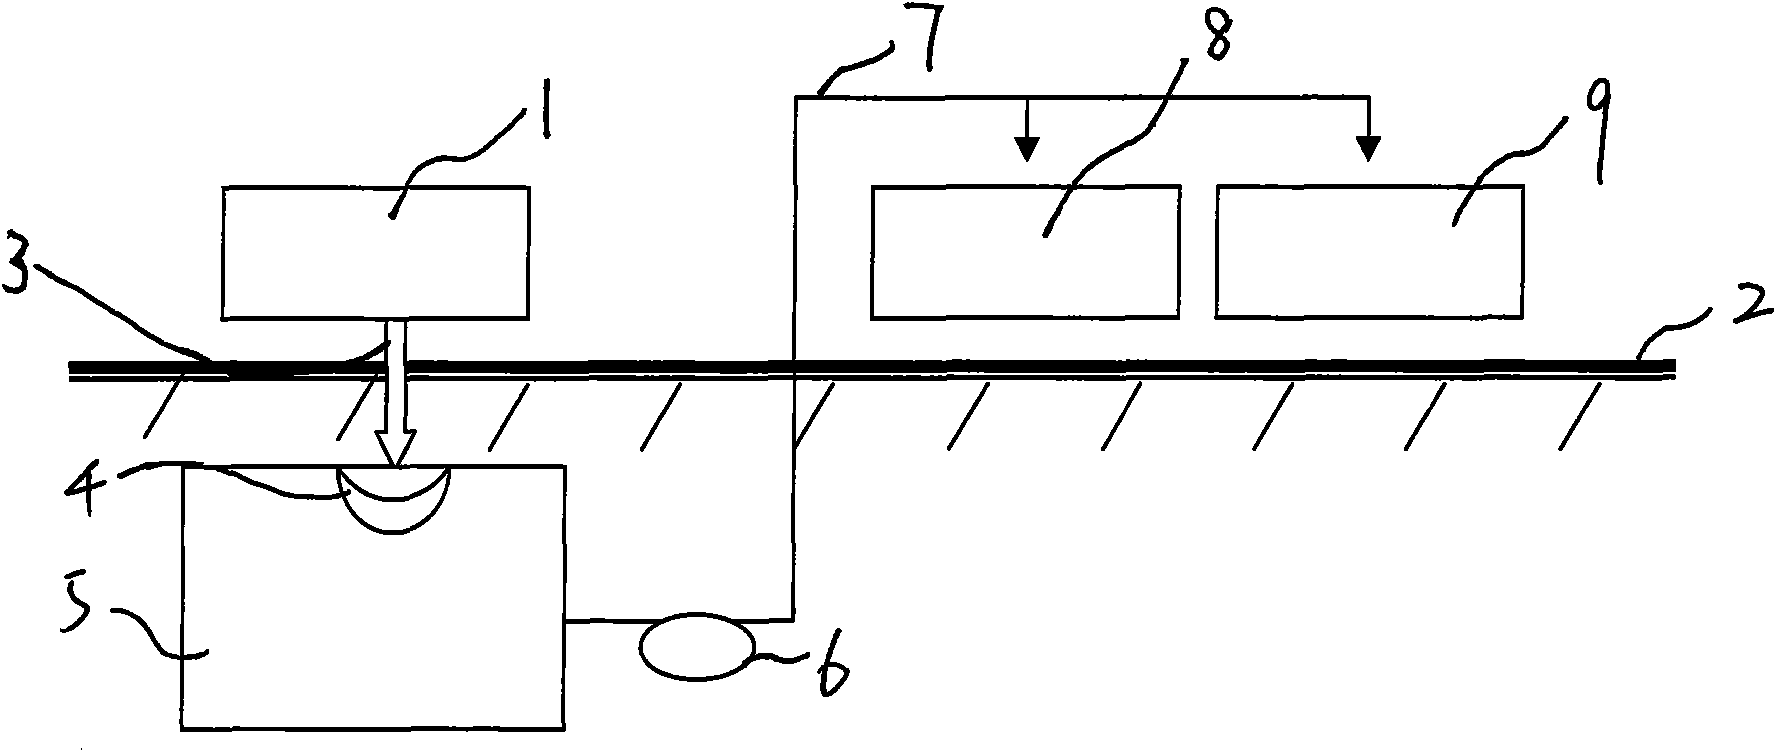 Filament sizing machine condensed water recycling device